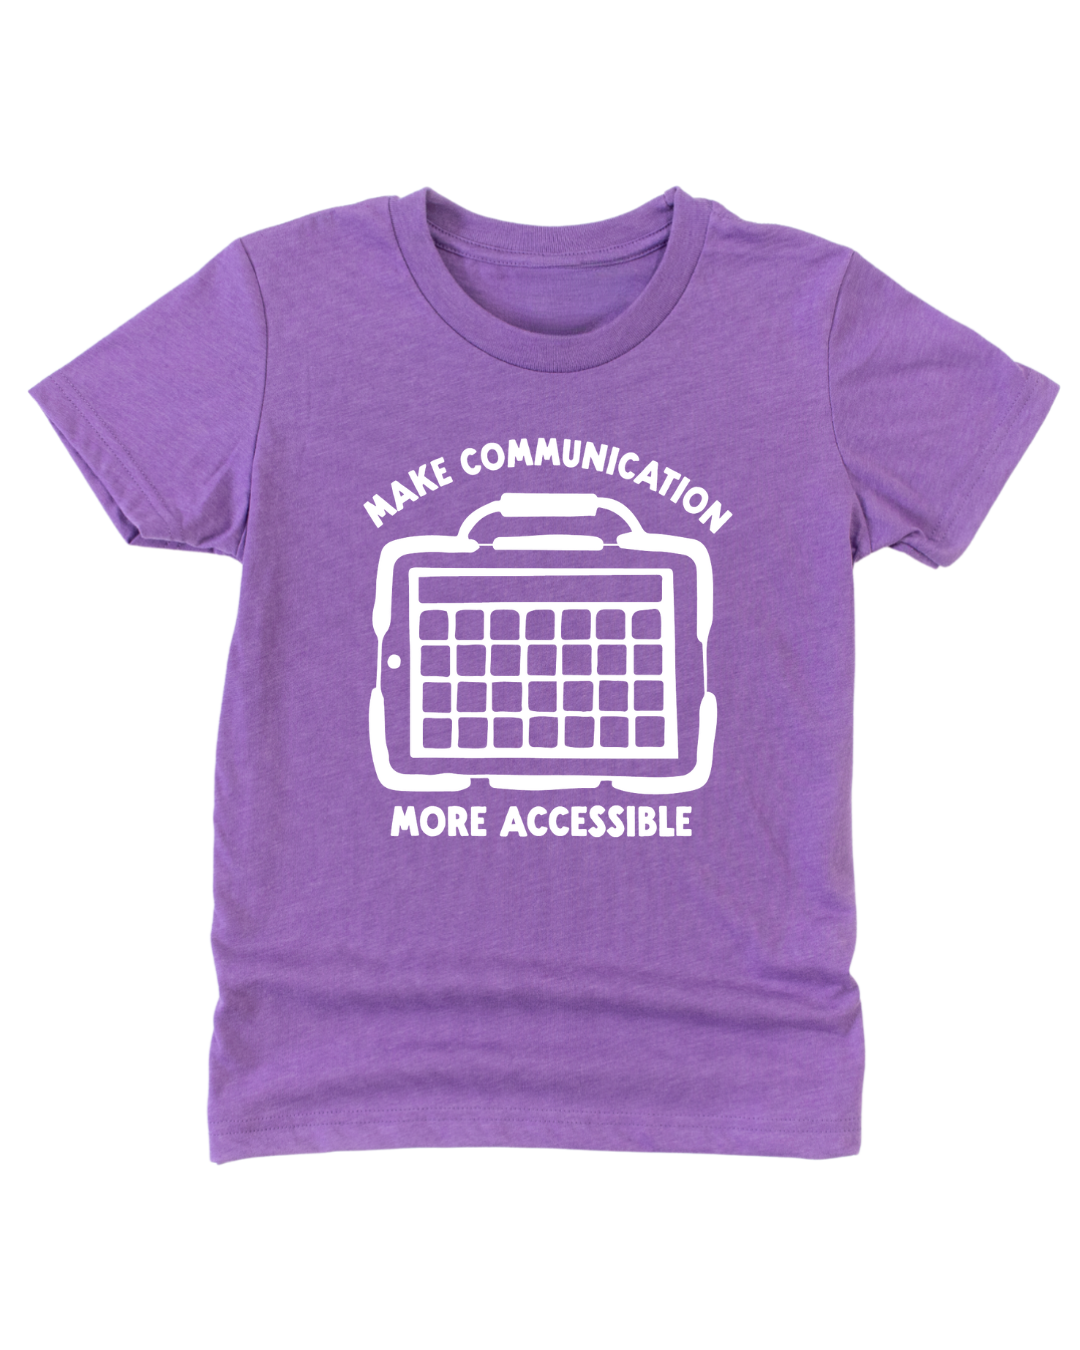 Make Communication More Accessible Children’s Tee